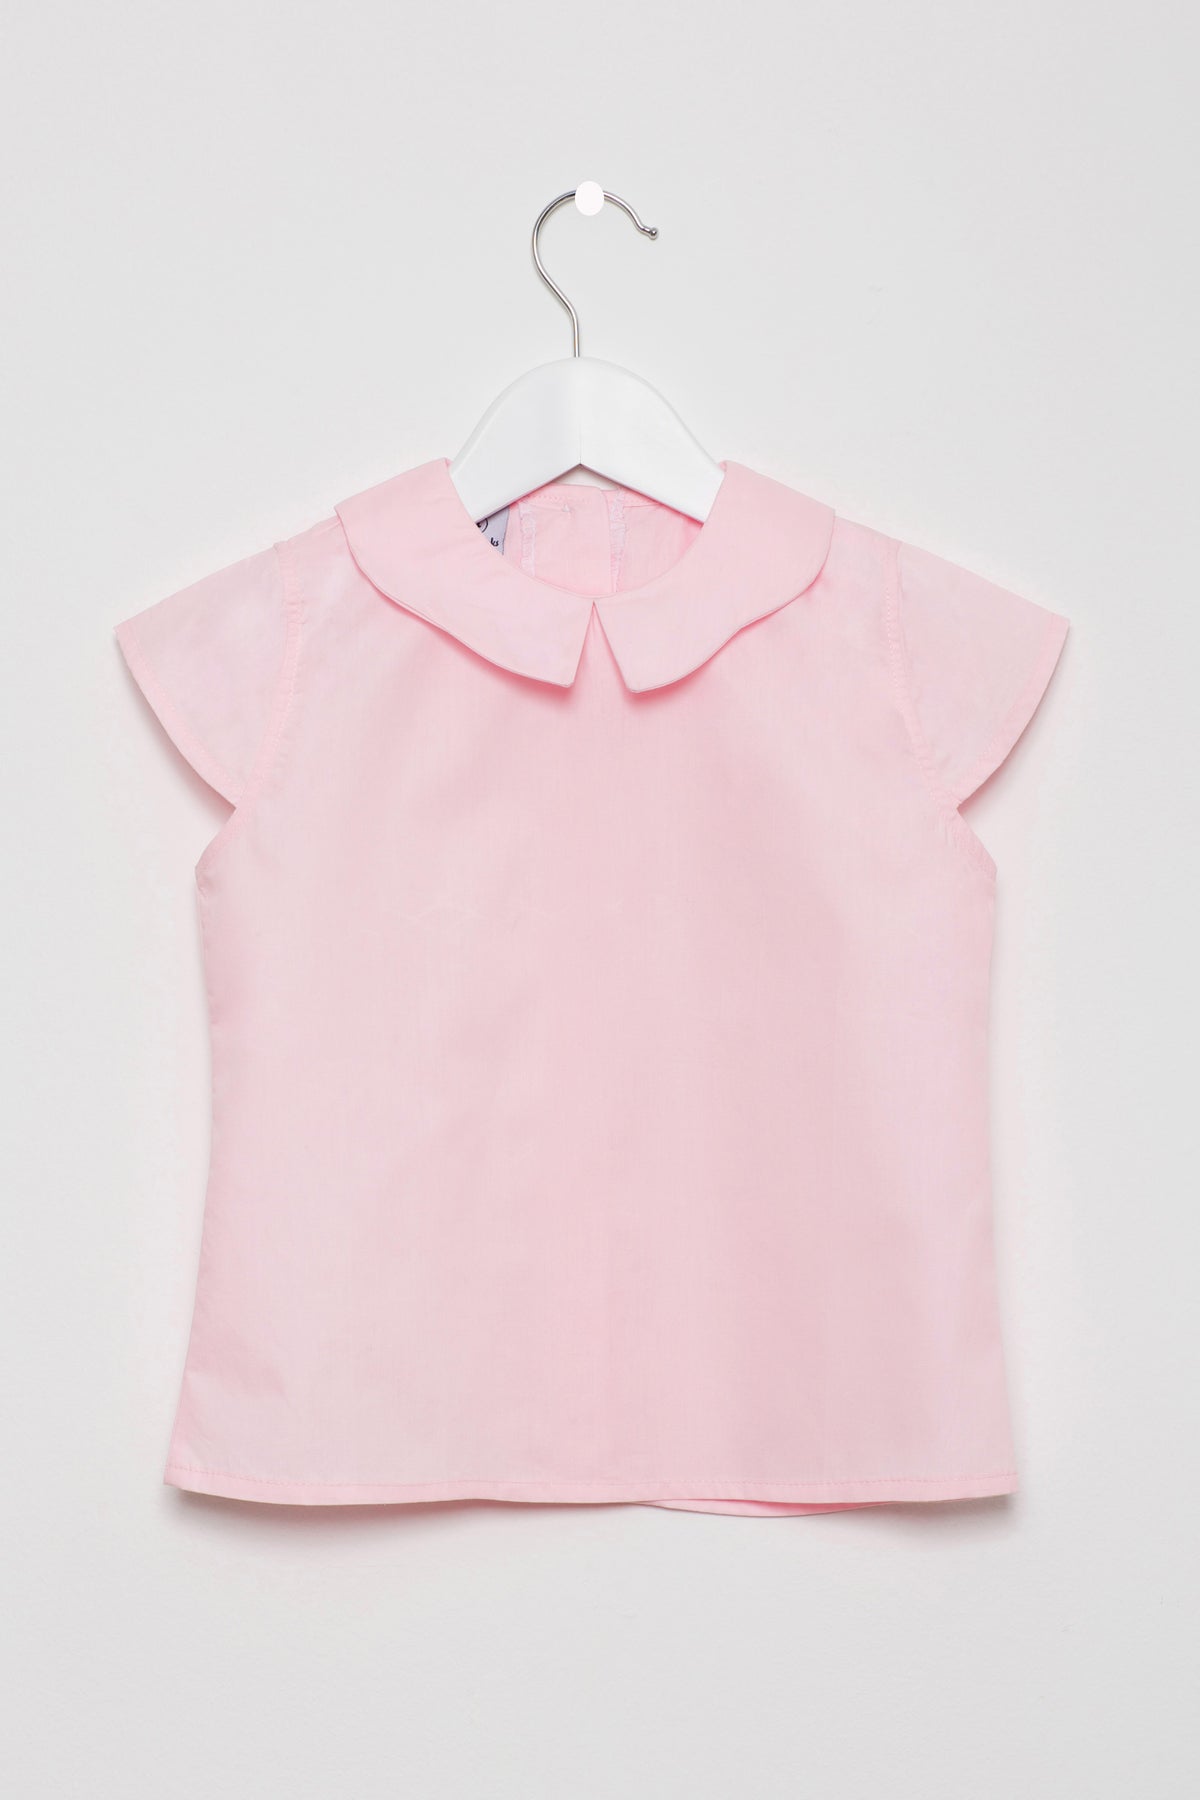 Pink Blouse for Spring Summer 2018